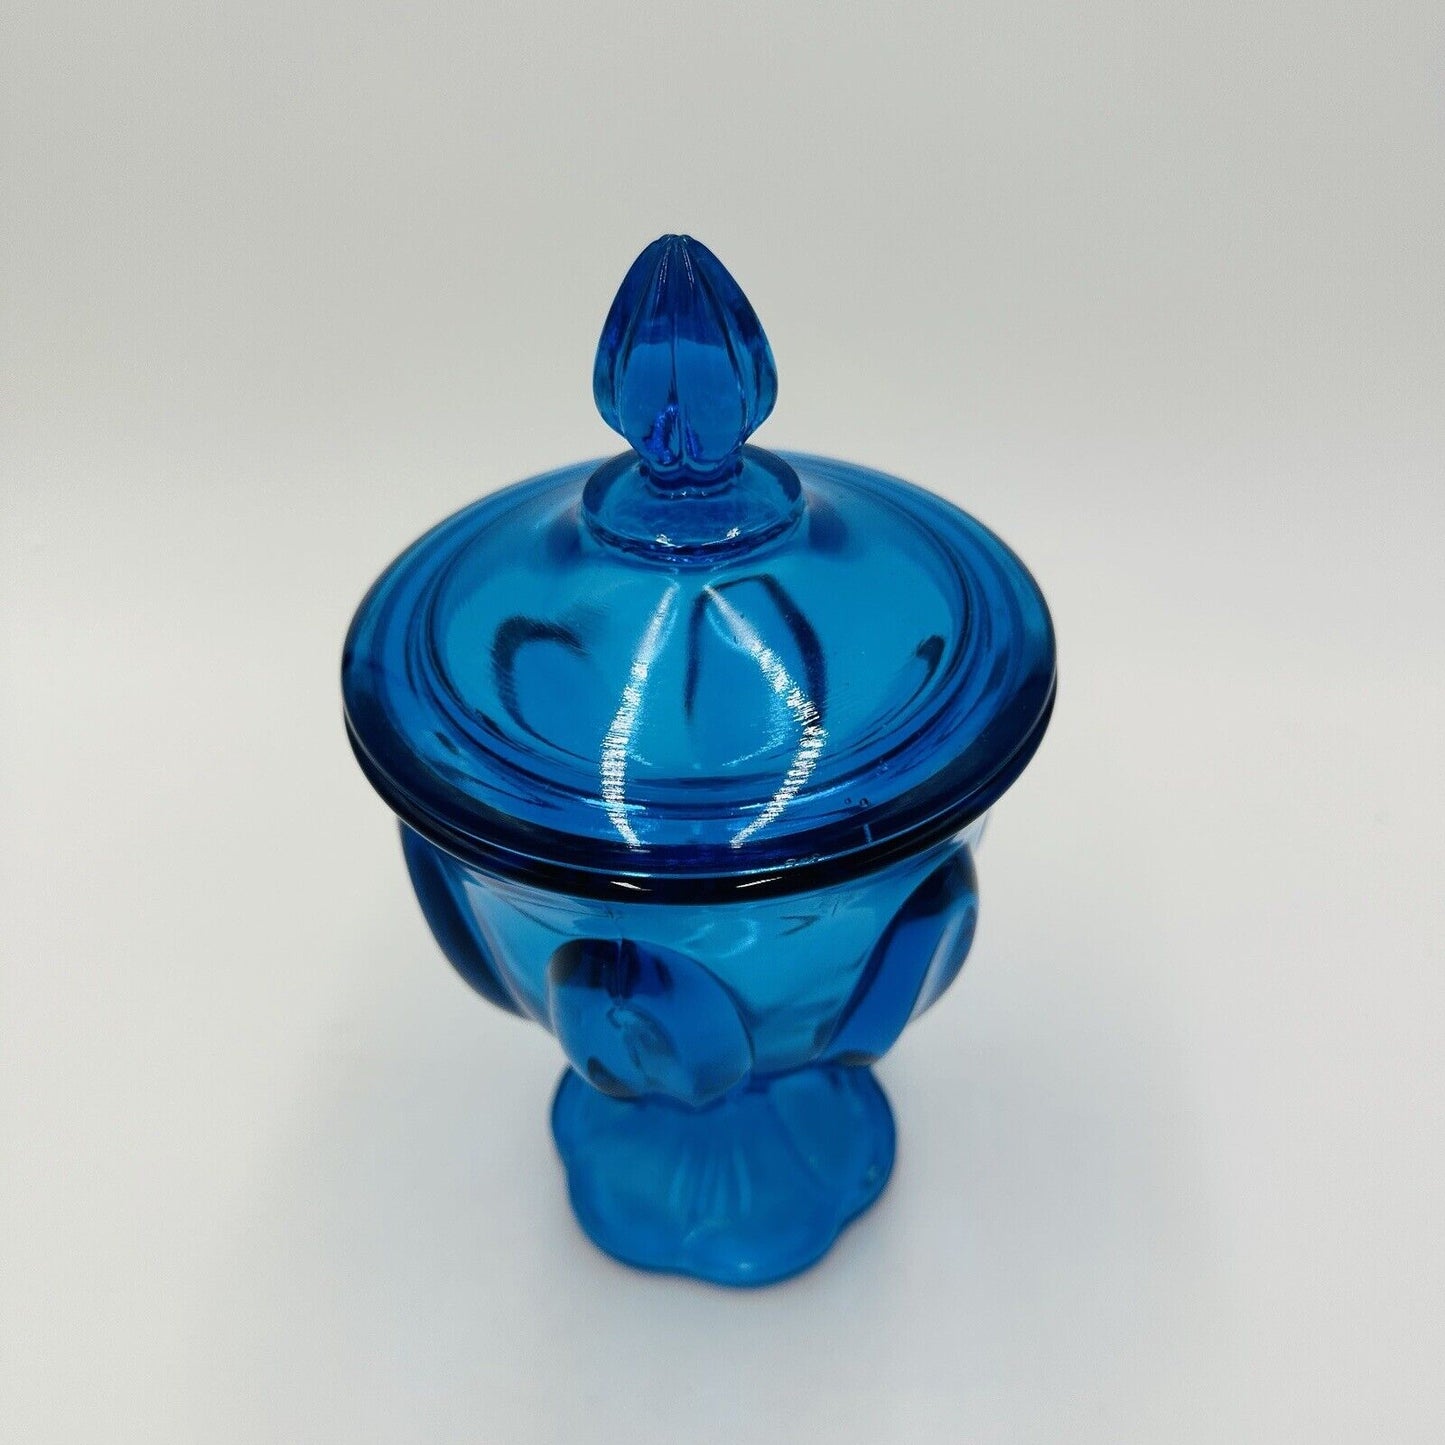 L. E. Smith Candy Dish Simplicity Pattern Petal Covered Lidded Compote 8" Blue